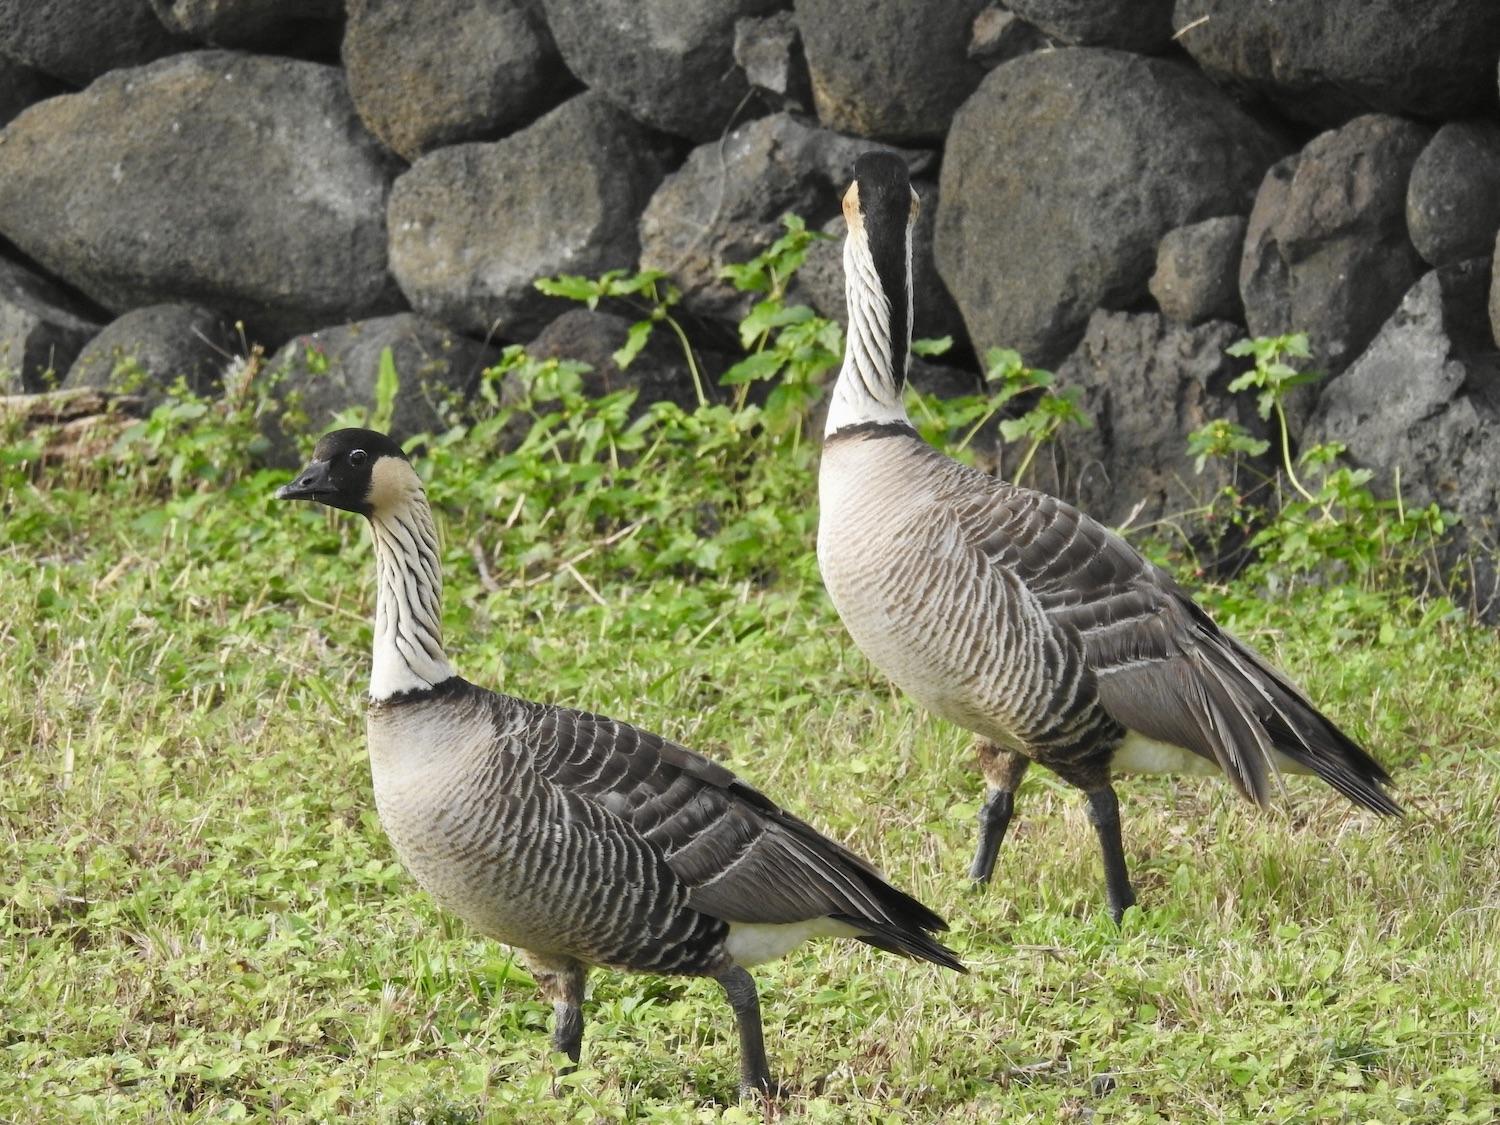 On the road to Punaluʻu Black Sand Beach, just outside Hawai'i Volcanoes National Park, I got a good look at the gorgeous necks of these two nēnē.